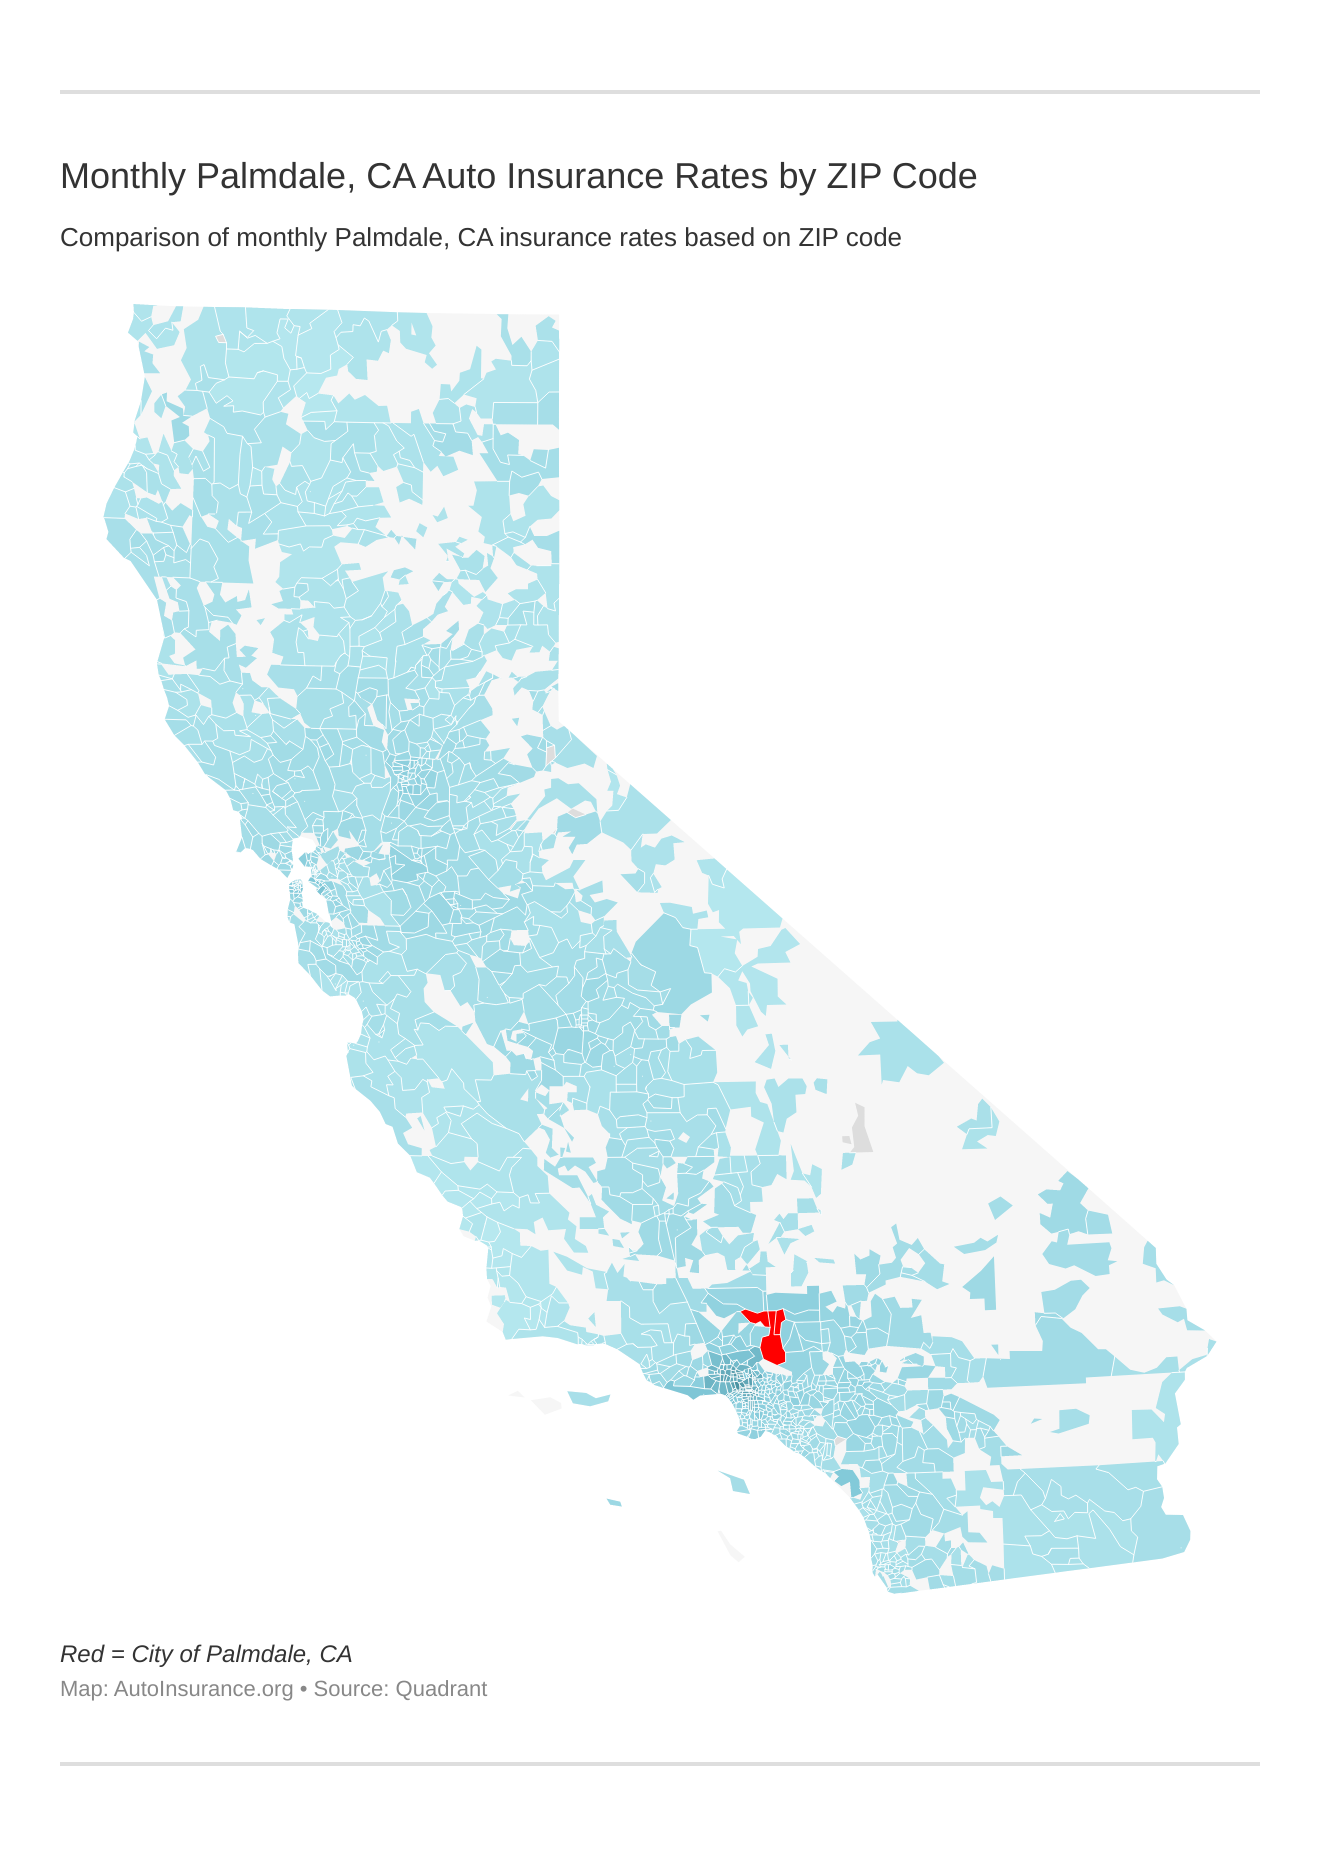 Monthly Palmdale, CA Auto Insurance Rates by ZIP Code